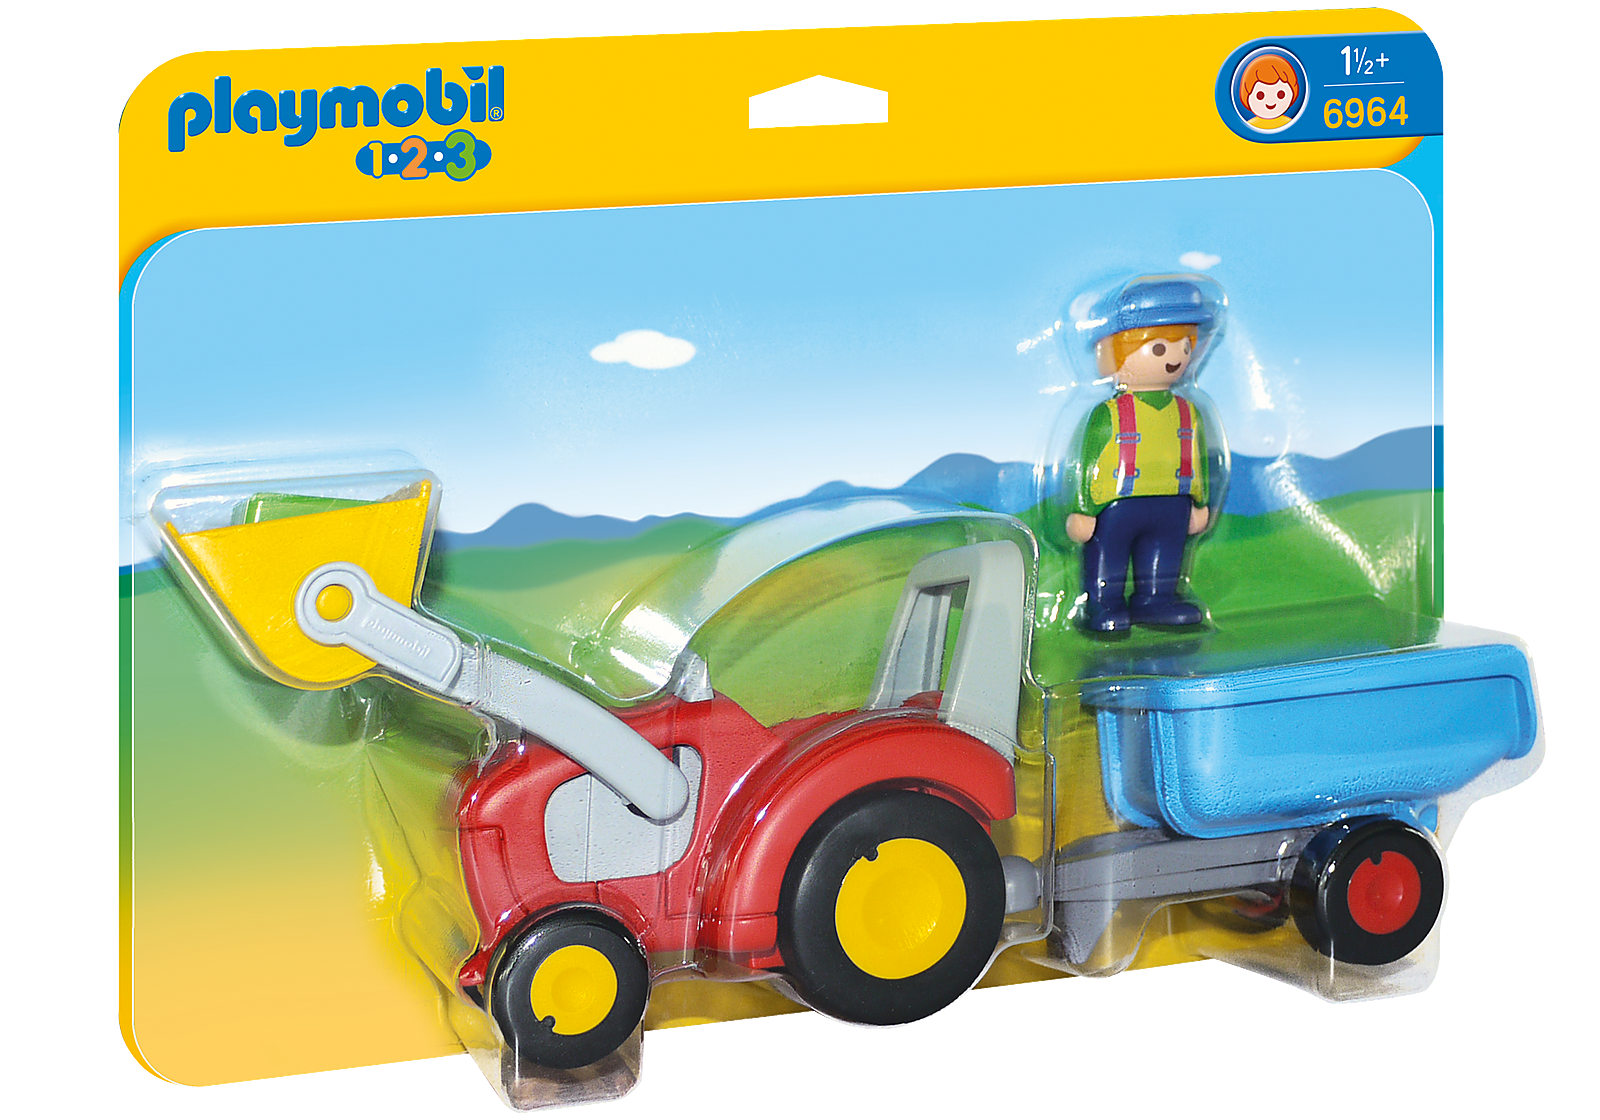 1.2.3. Tractor With Trailer